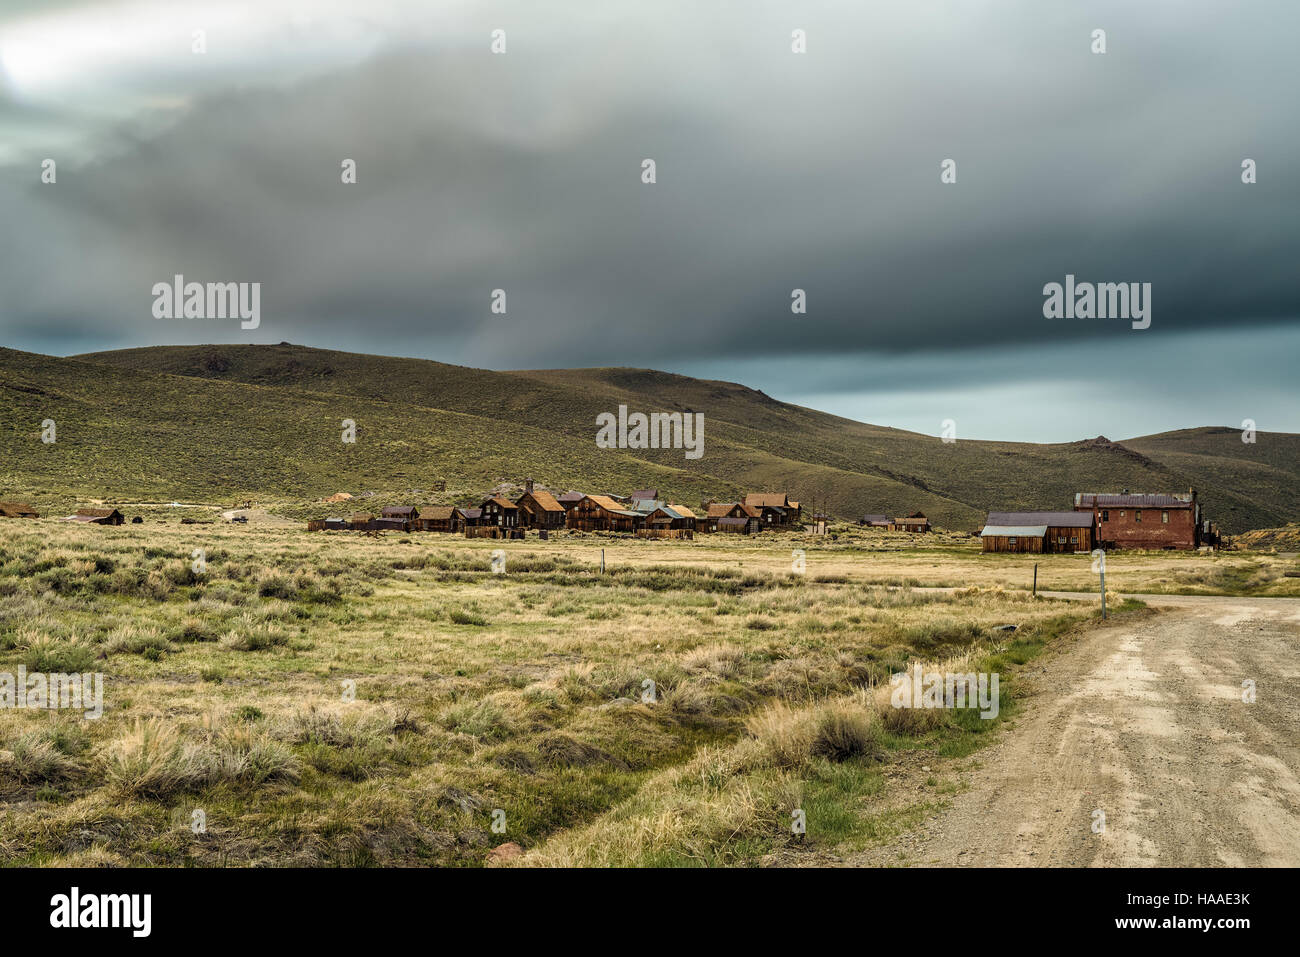 Bodie ghost town in California. Bodie is a historic state park from a gold rush era  in the Bodie Hills east of the Sierra Nevada. Long exposure. Stock Photo